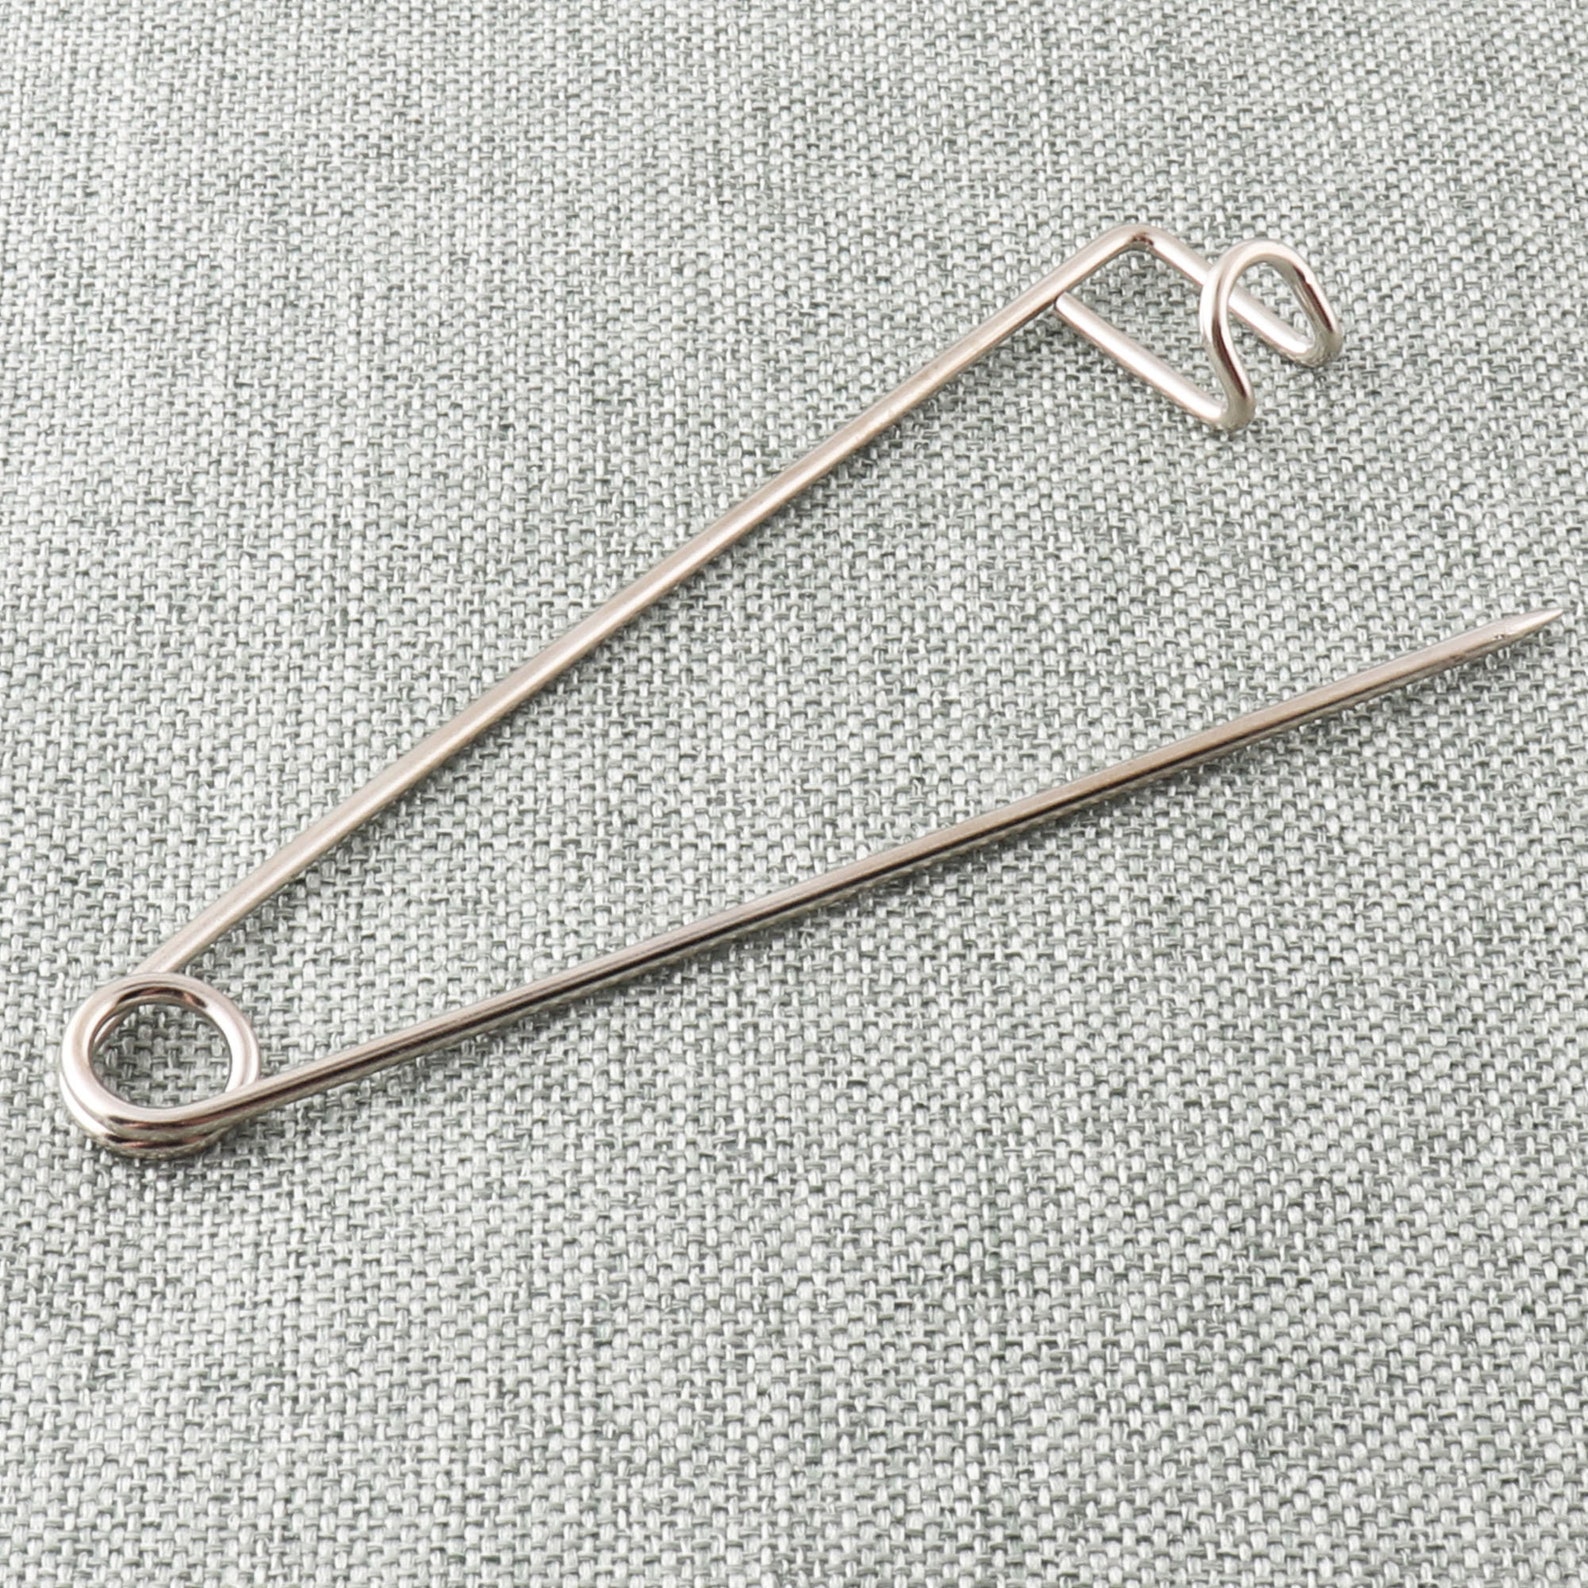 Giant Safety Pins Jumbo Laundry Safety Pins 10cm Silver Stitch - Etsy